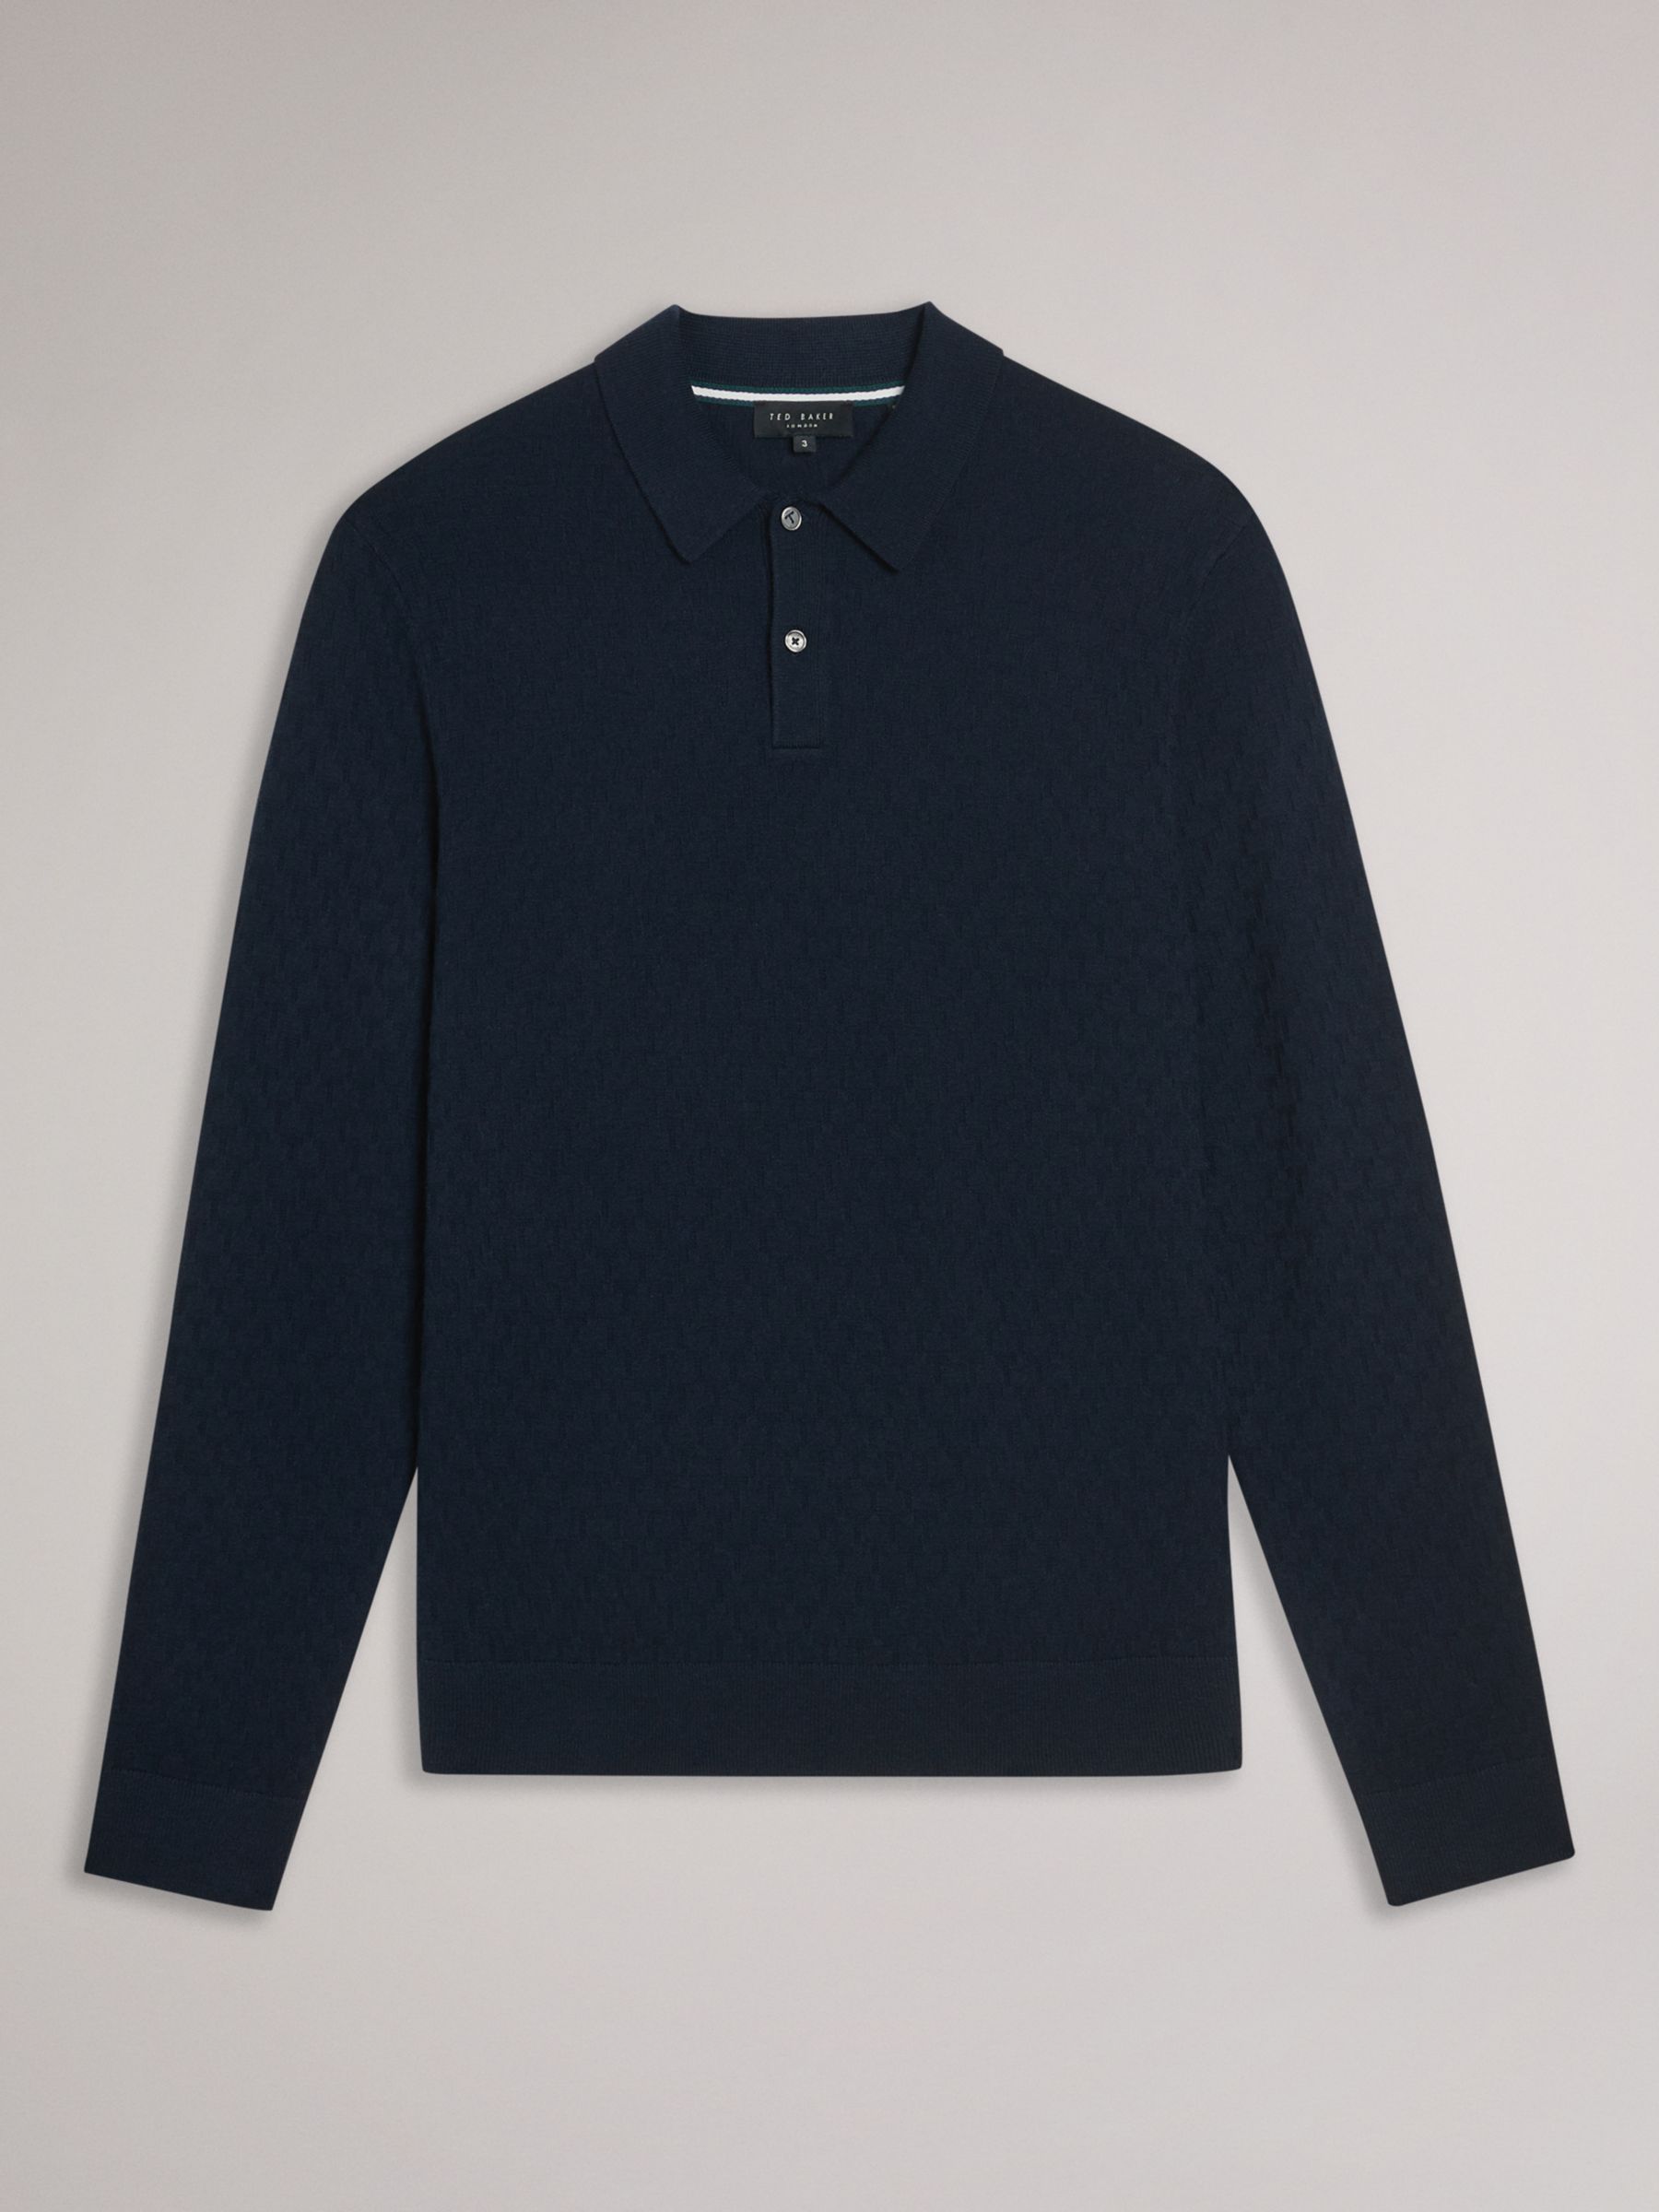 Ted Baker Morar Knitted Polo Top, Blue Navy, L